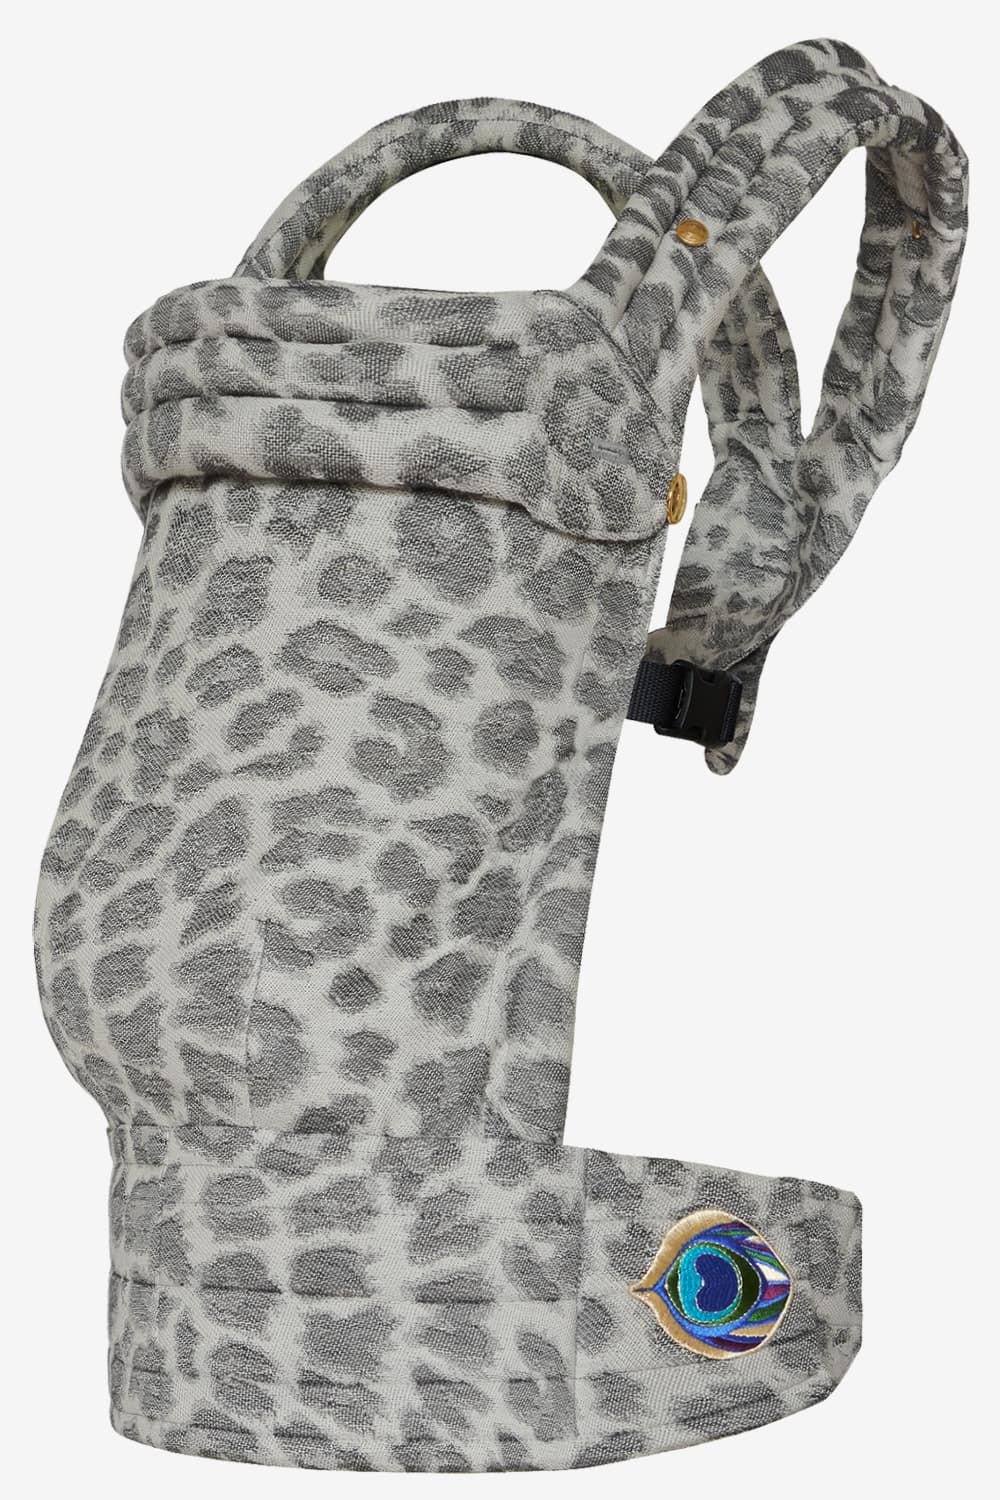 Light grey baby carrier with an leopard print in a cotton blend